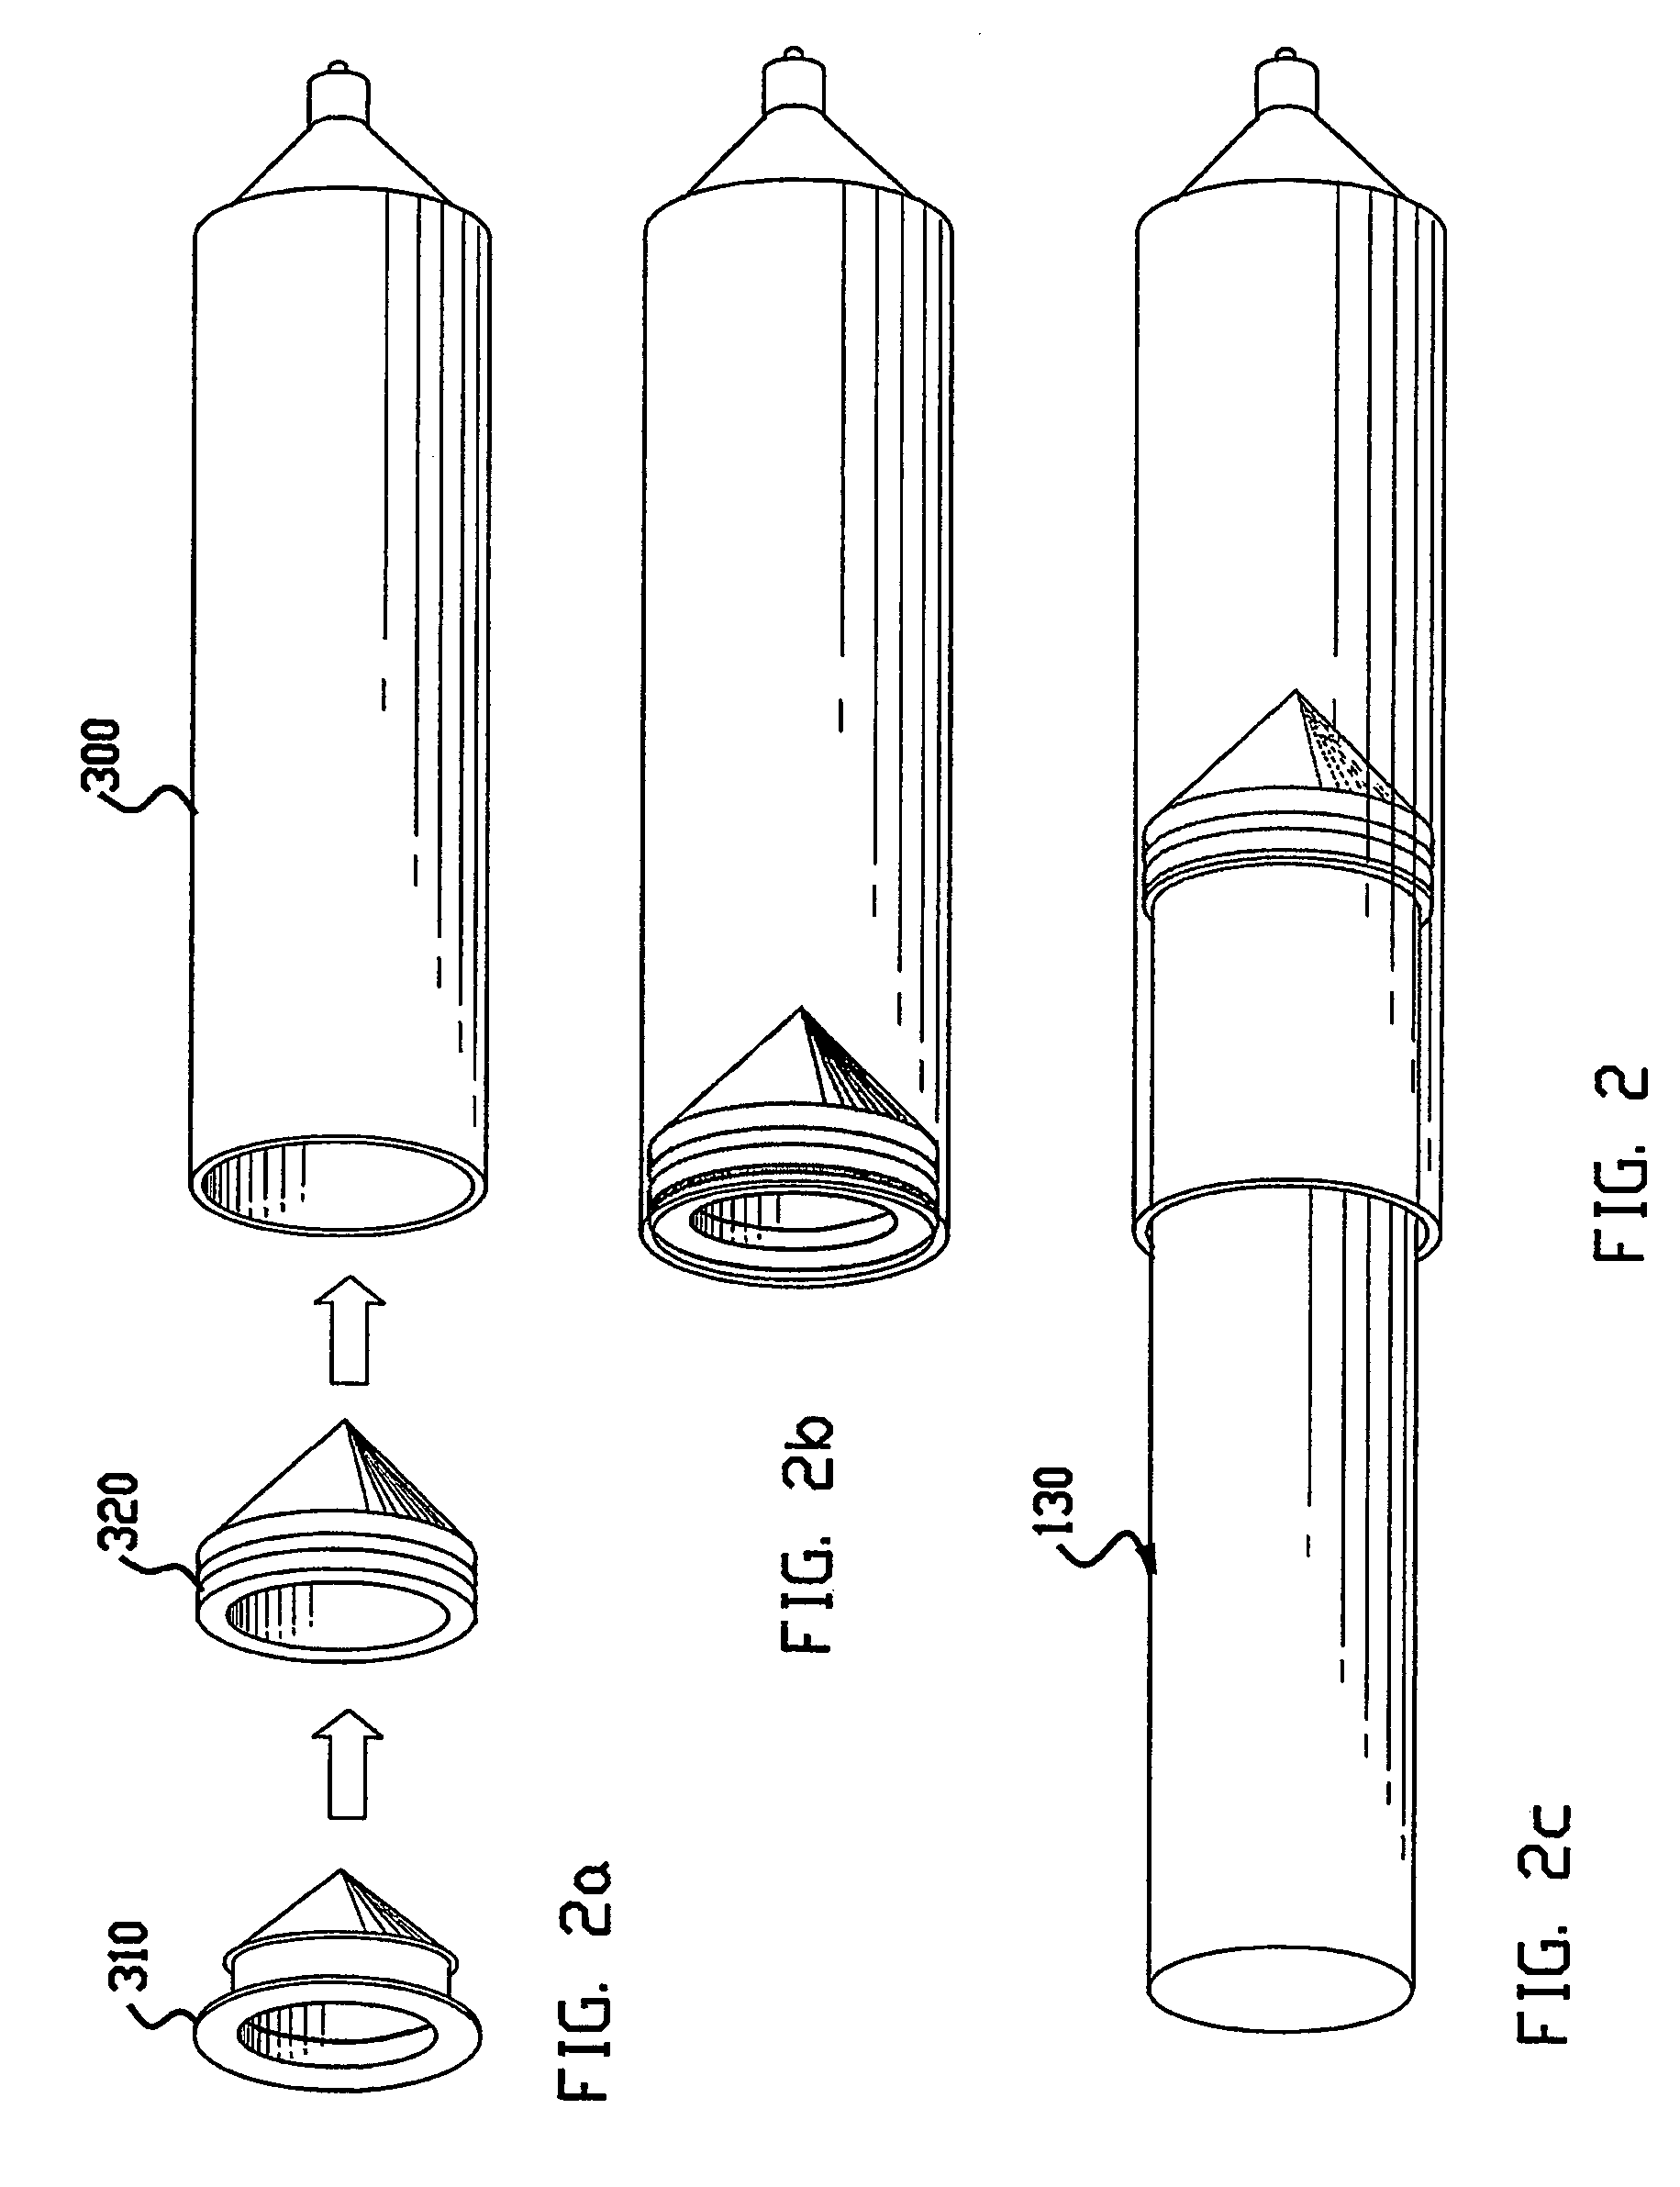 Medical injector systems having an injector plunger that releasably engages a syringe hub upon retraction of the plunger